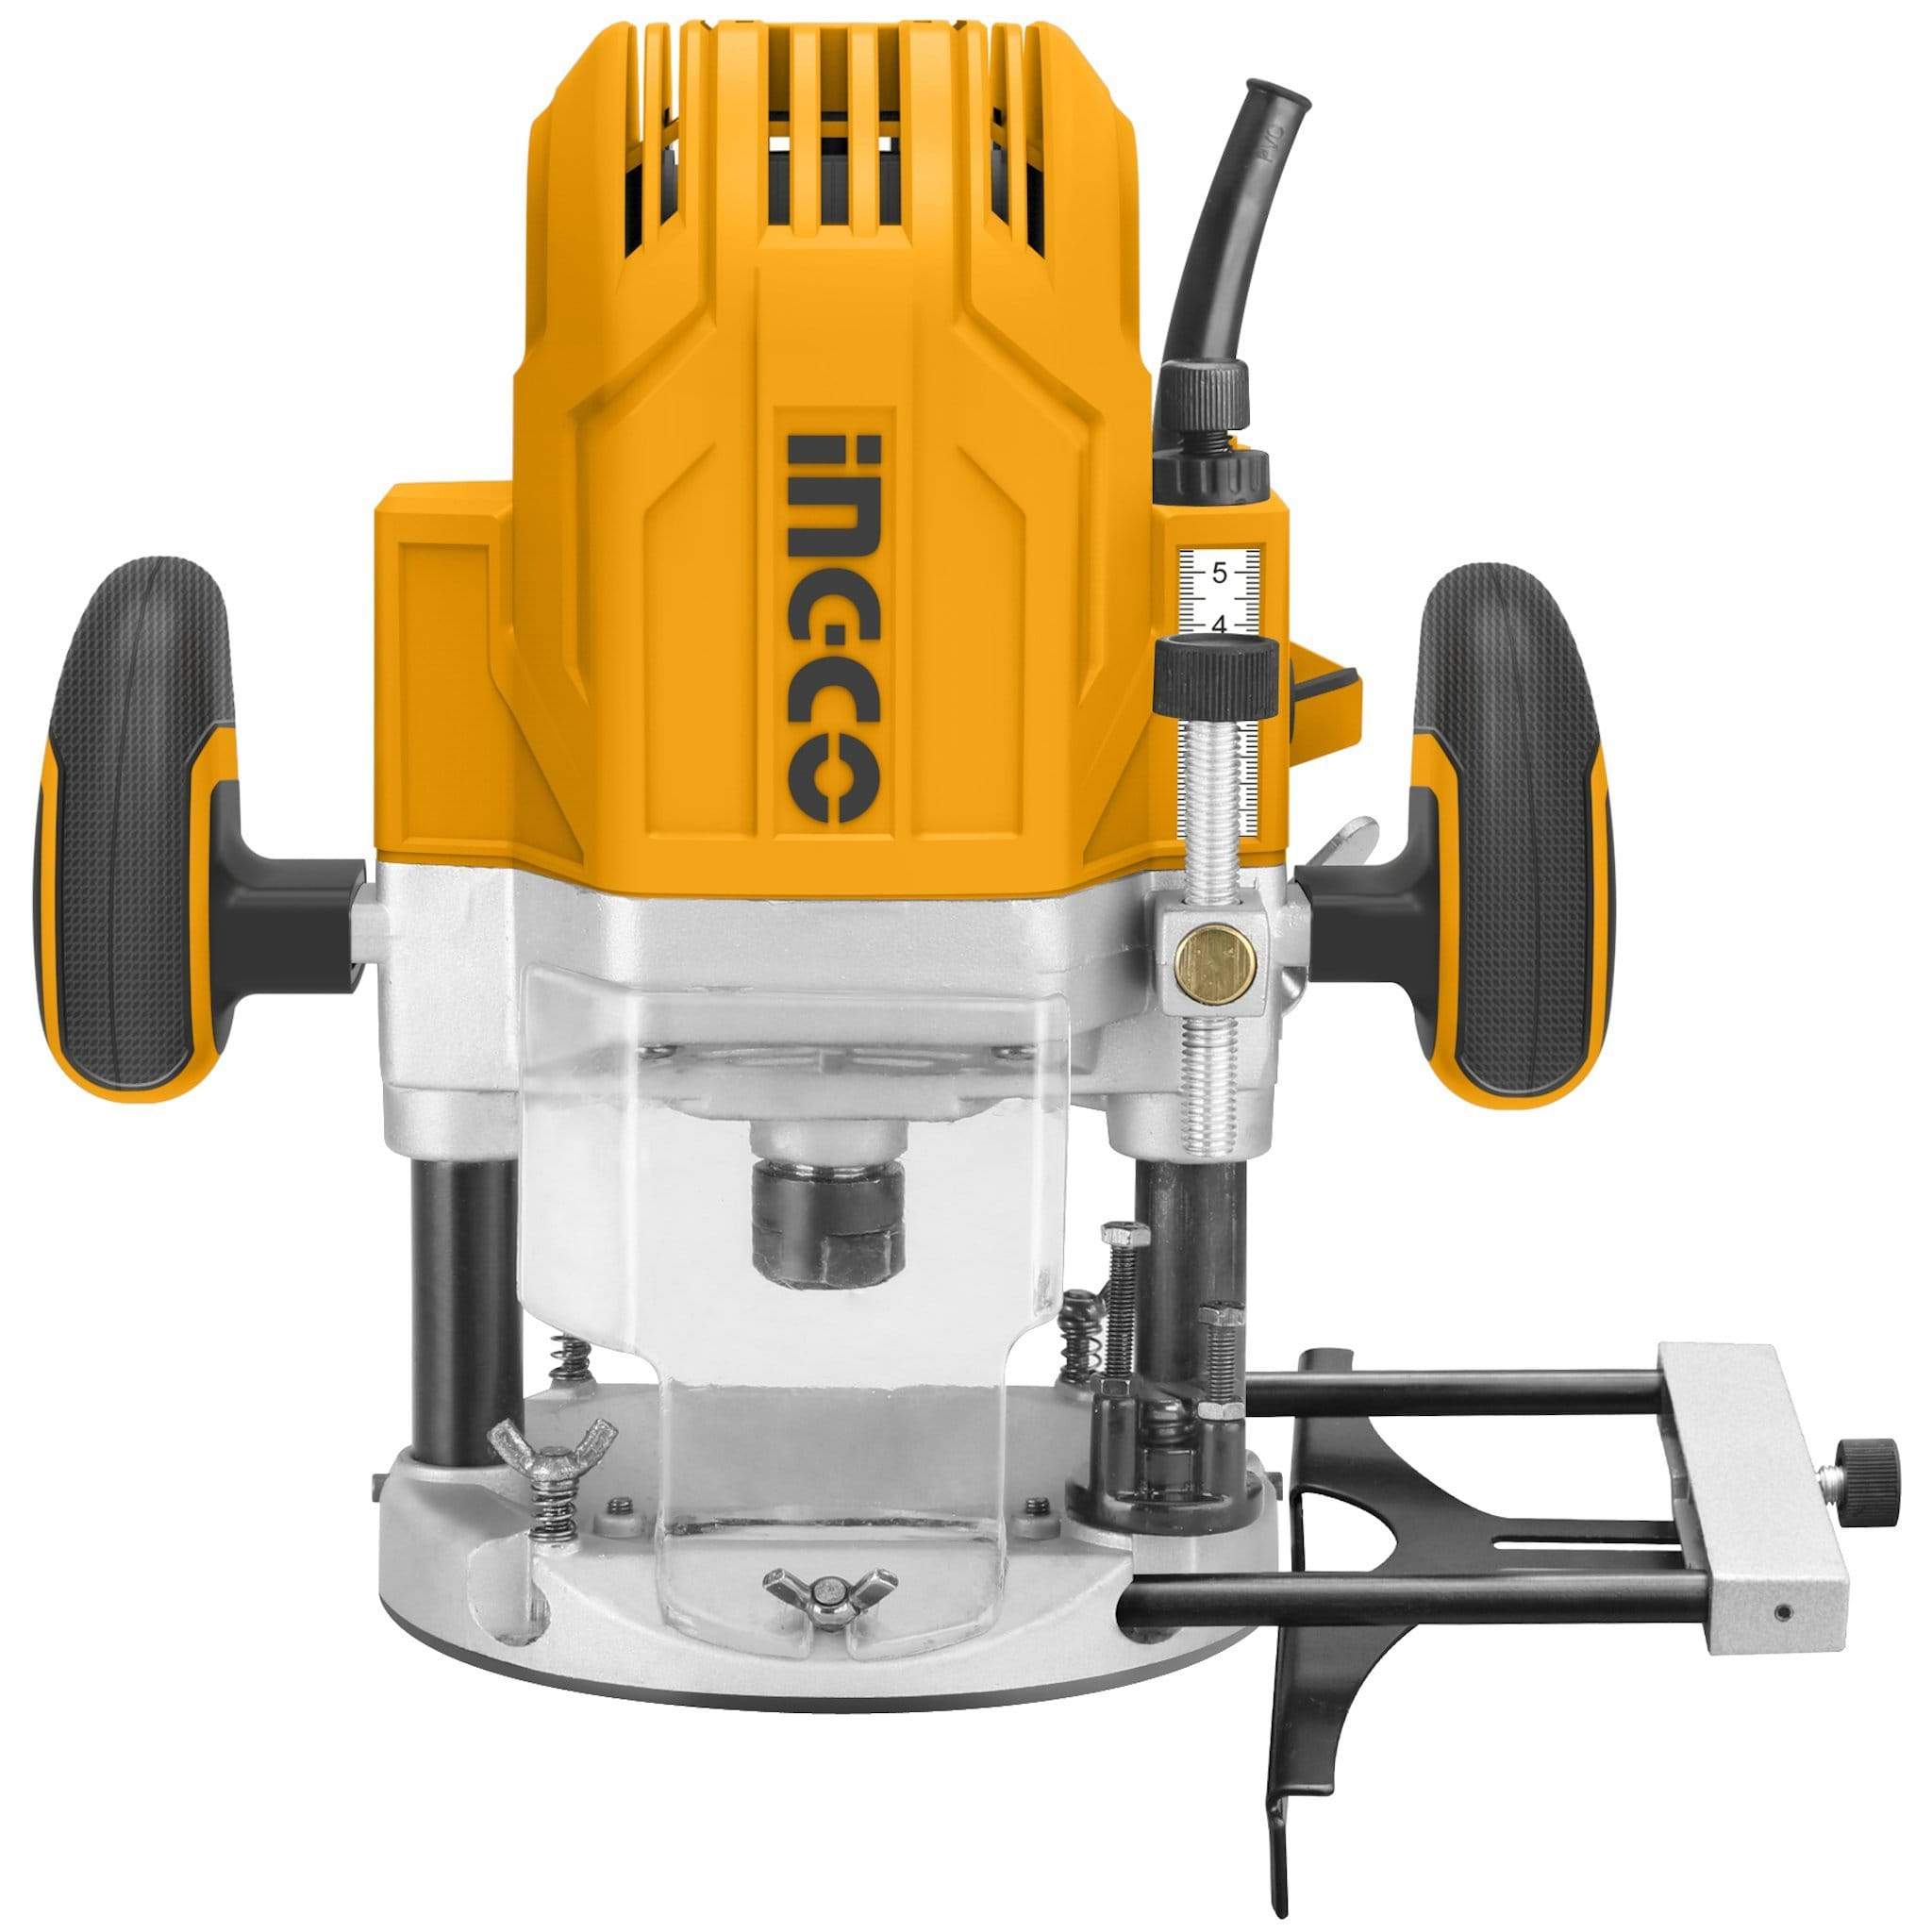 Ingco Electric Router 1600W – RT160028 | Supply Master | Accra, Ghana Tools Building Steel Engineering Hardware tool